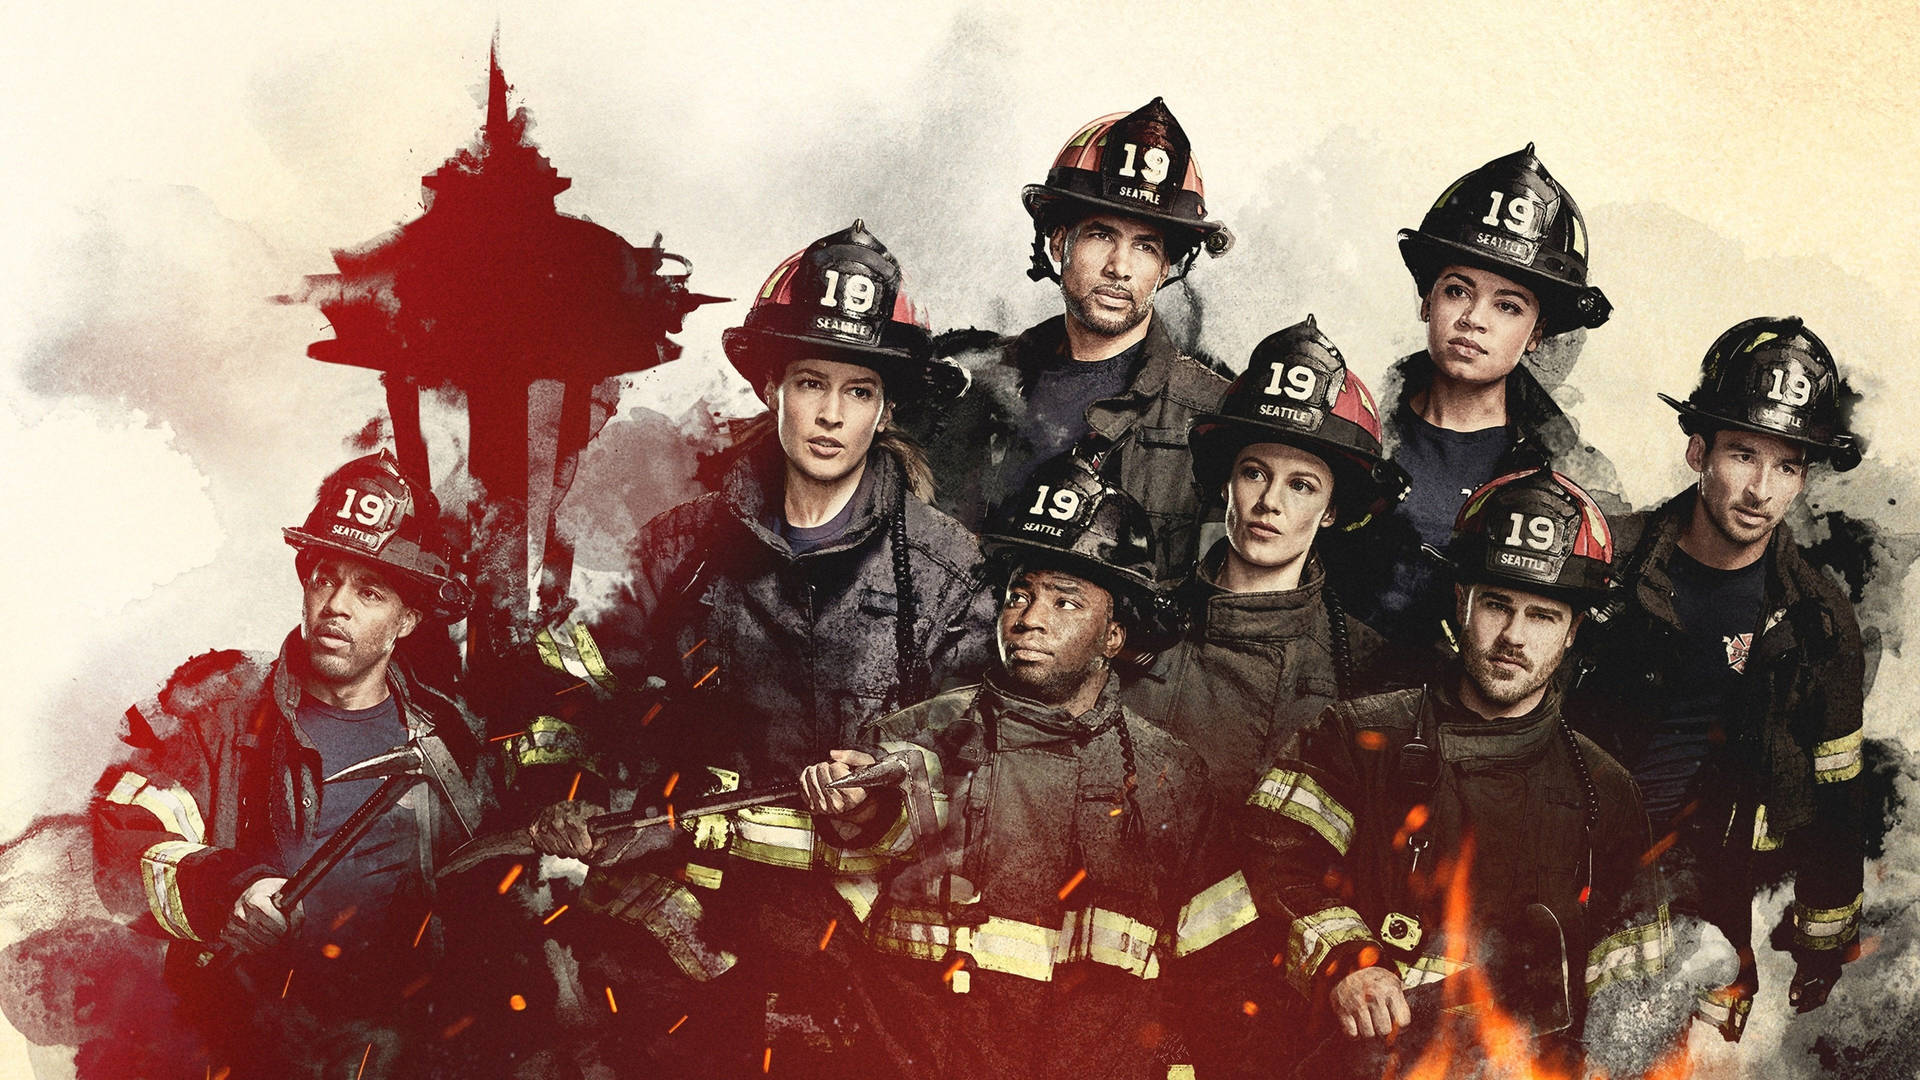 Station 19 - Brave Firefighters in Action Wallpaper